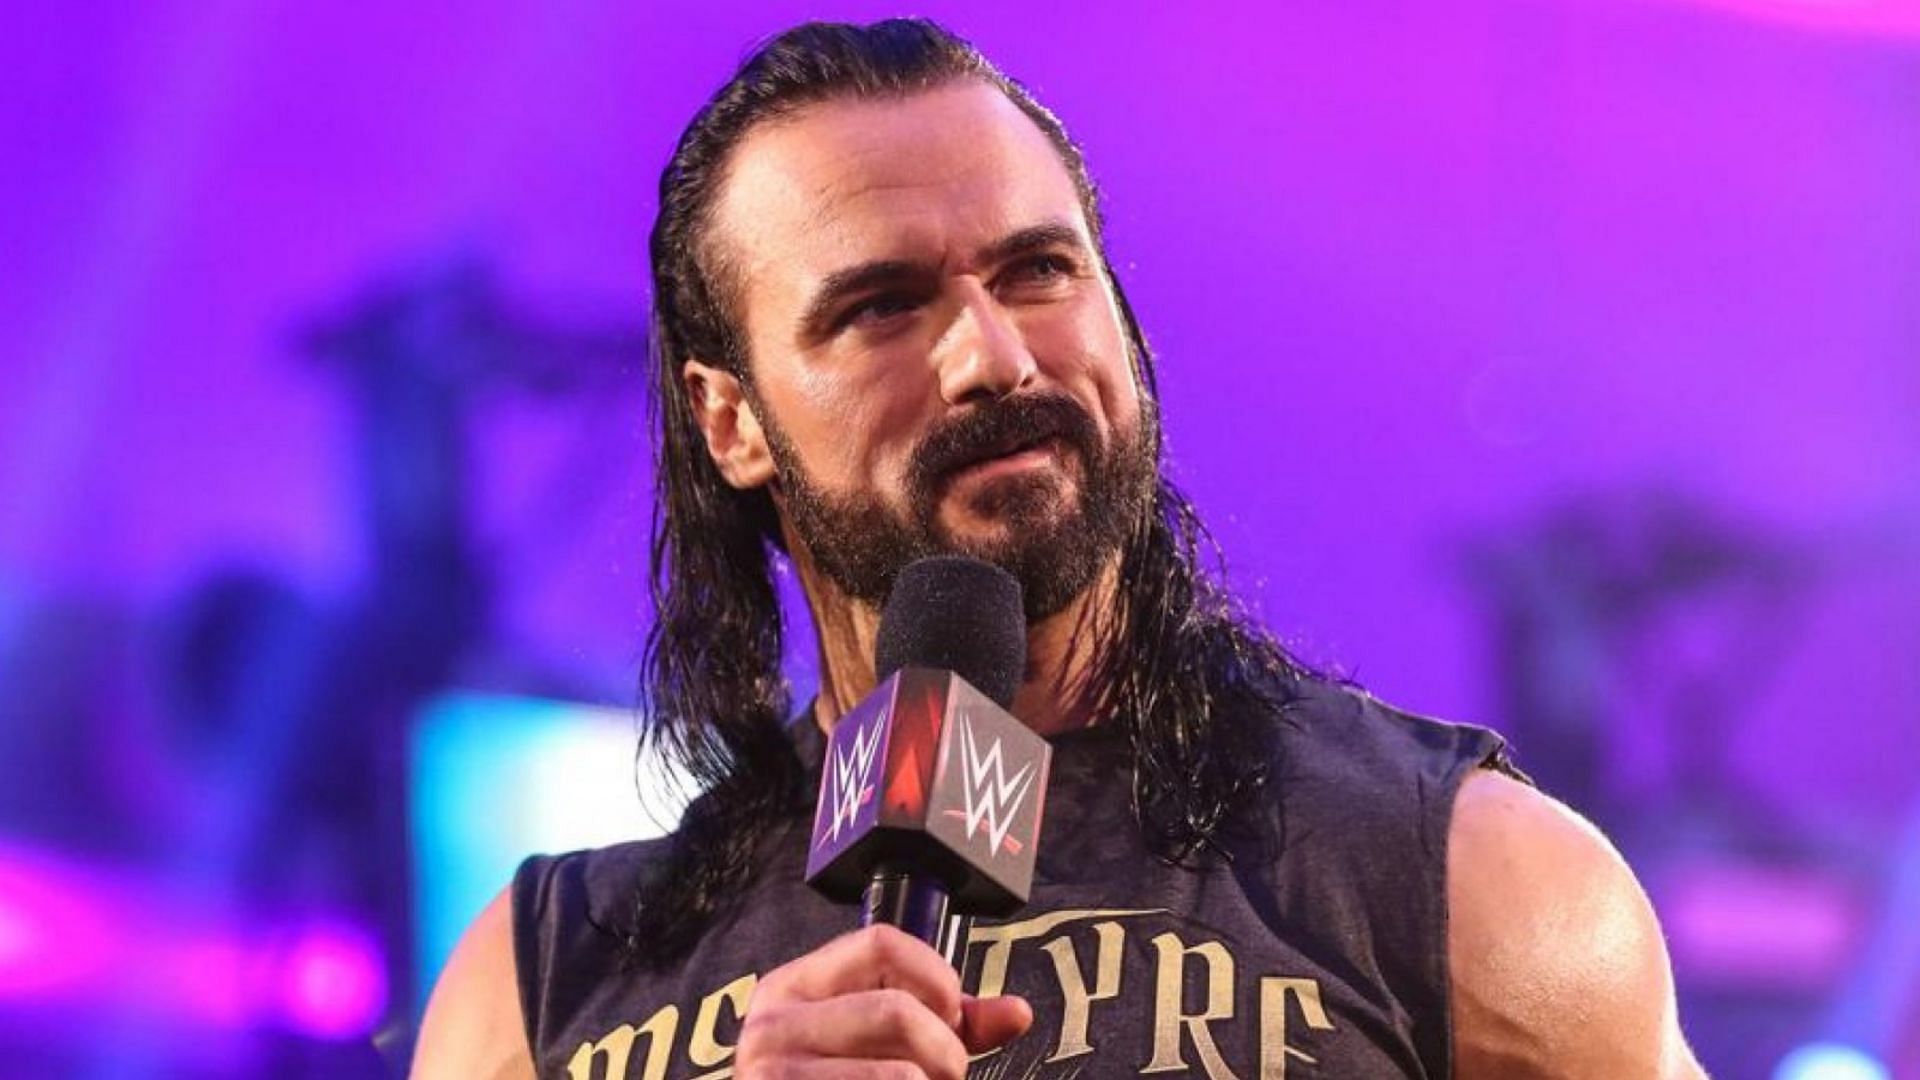 Stephanie McMahon requested that Drew McIntyre change his name